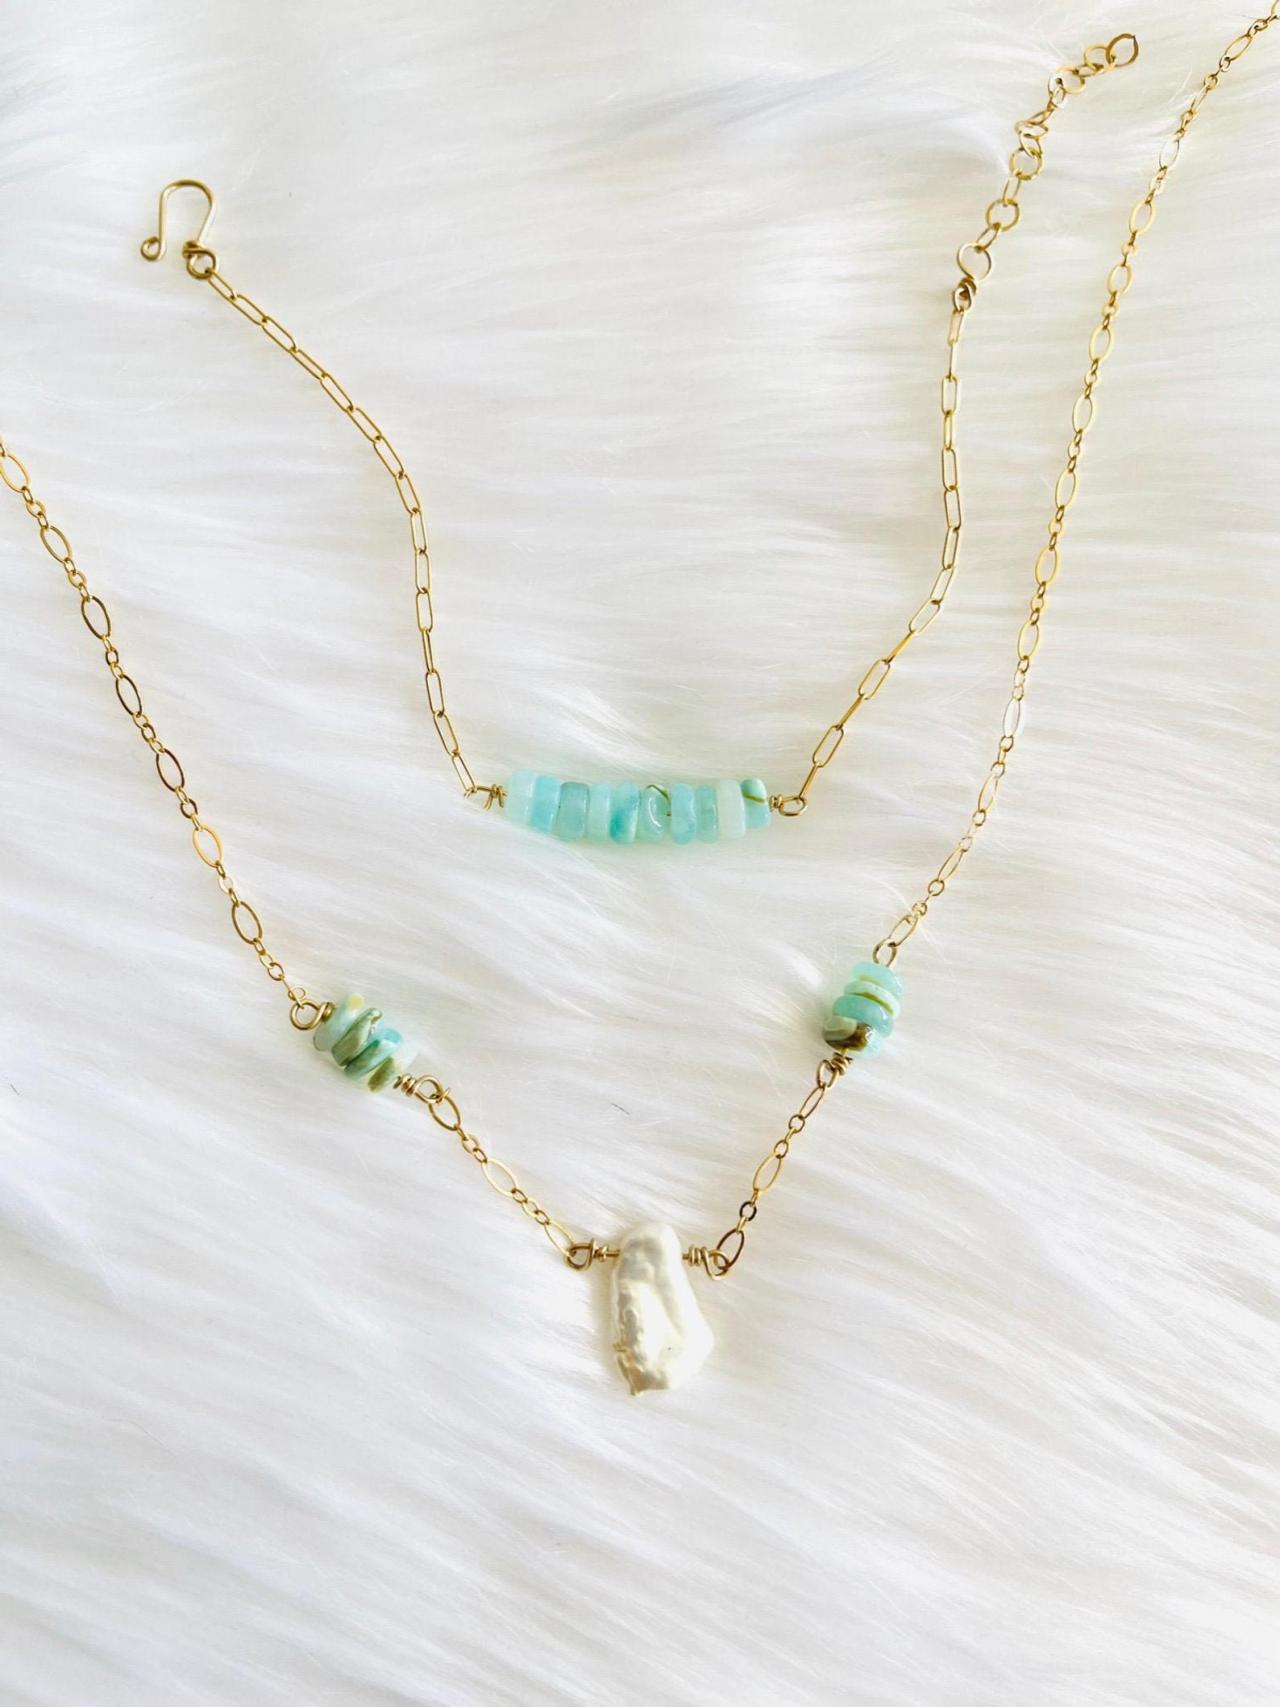 Peruvian Opal Necklace; Freshwater Pearls; 14k Gold Filled; Opal Crystal Jewelry; Healing Jewelry